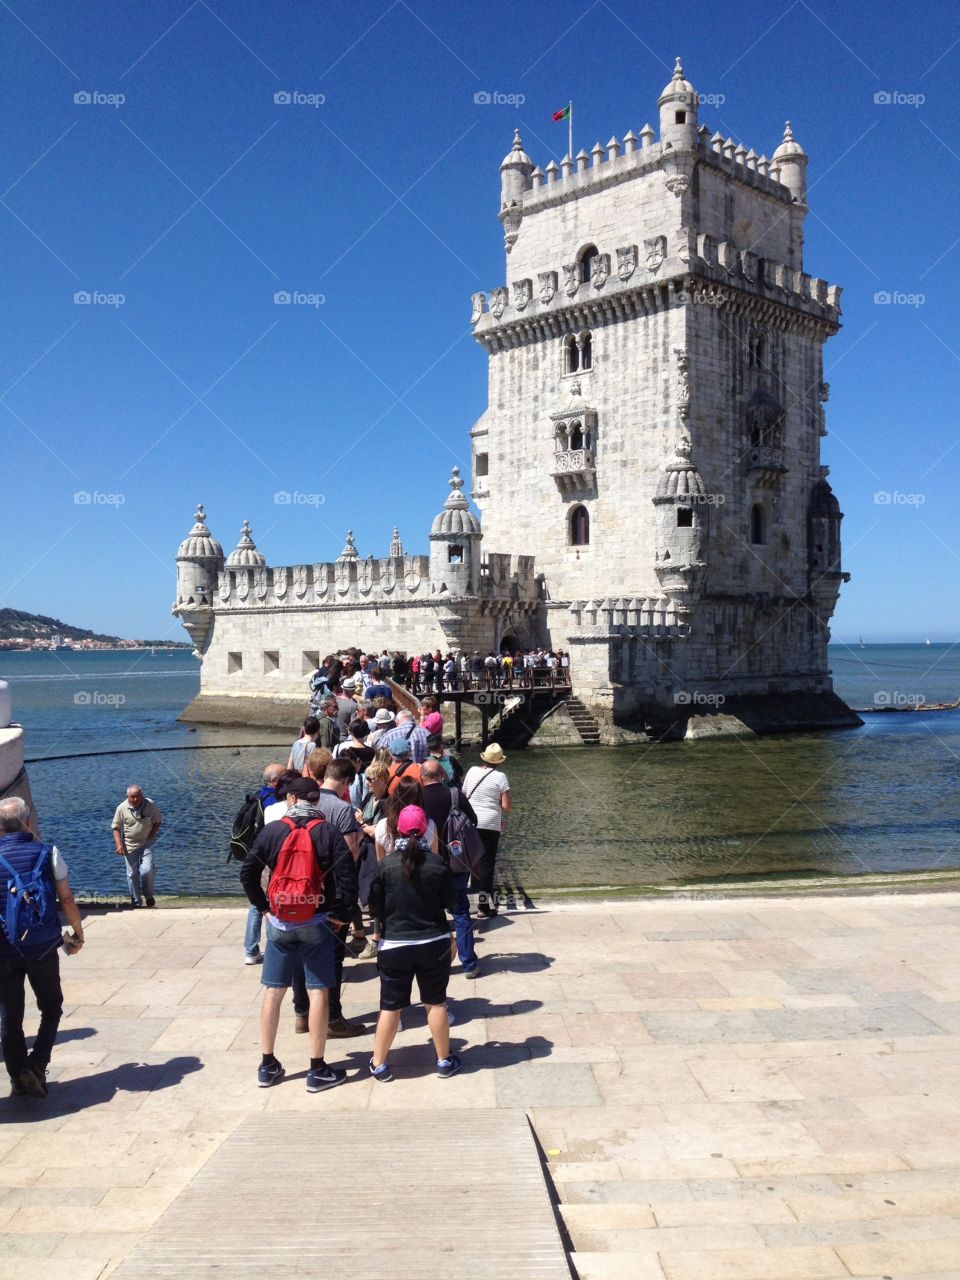 Belem tower. Tourists queuing at the tower of Belem